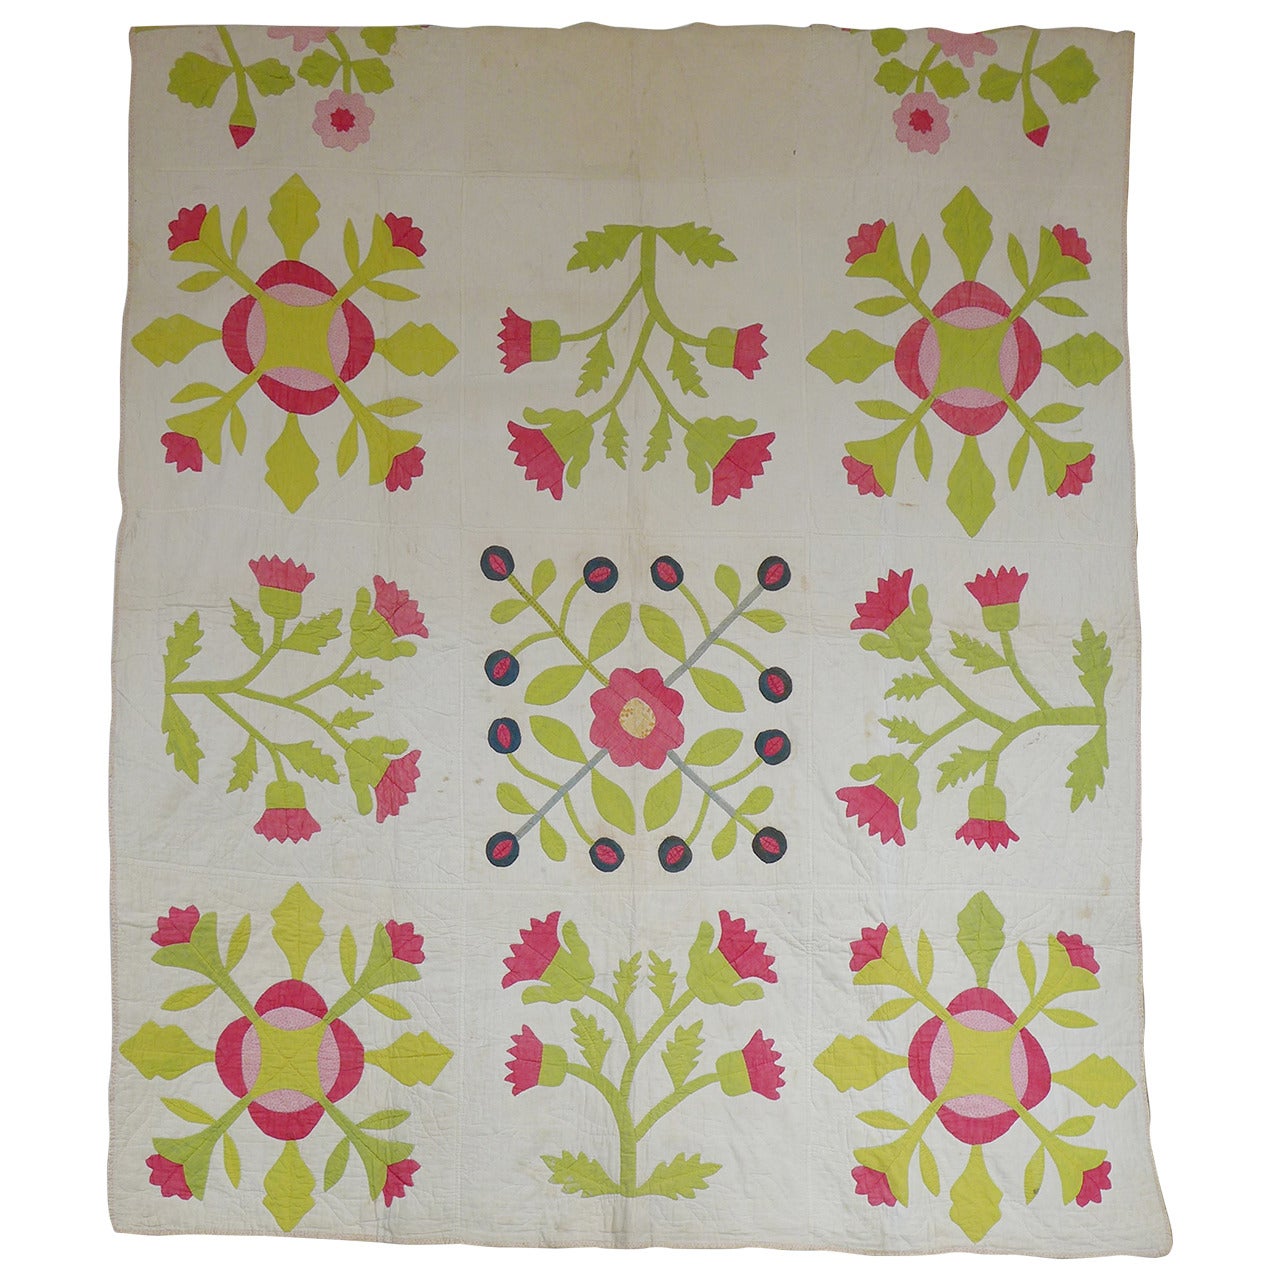 Applique Quilt with Floral Motifs on a White Background For Sale